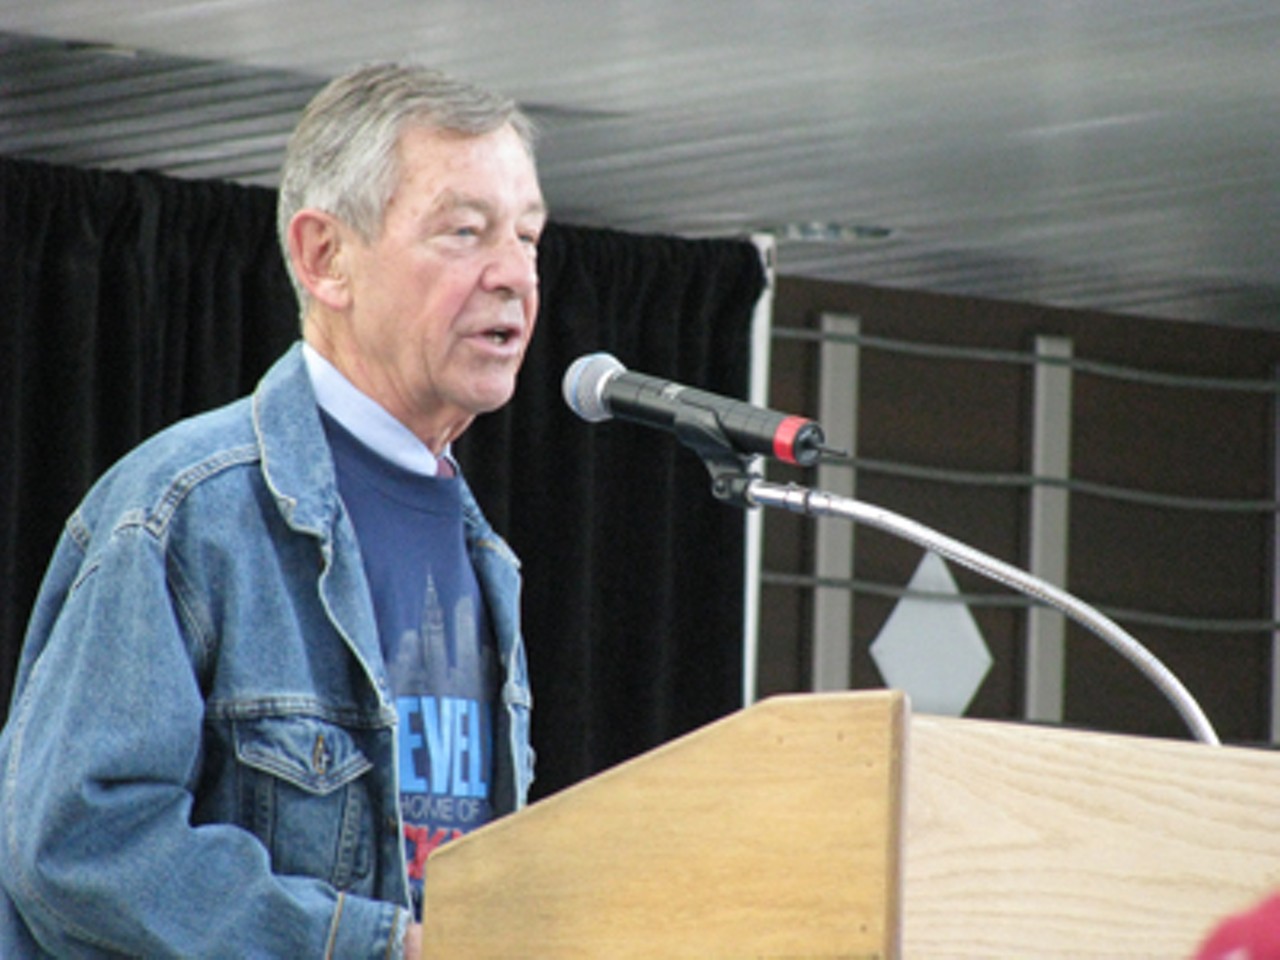 George Voinovich, the ex-governor of Ohio and currently a U.S. senator. He was mayor of Cleveland when the city found out it was to get the Rock Hall.